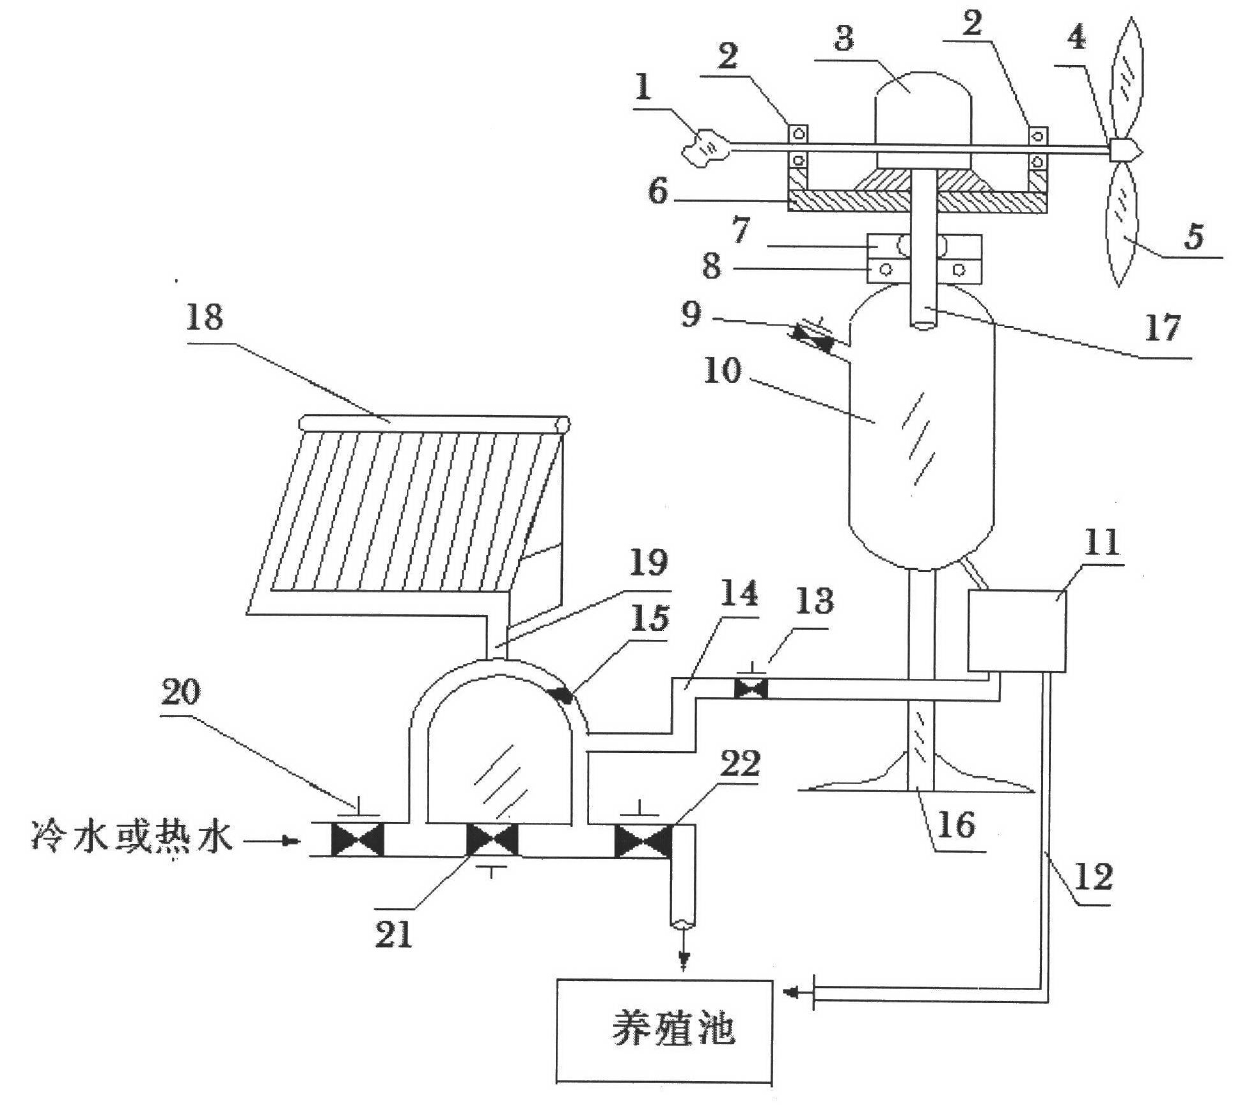 Aquiculture wind-power oxygenation heating device